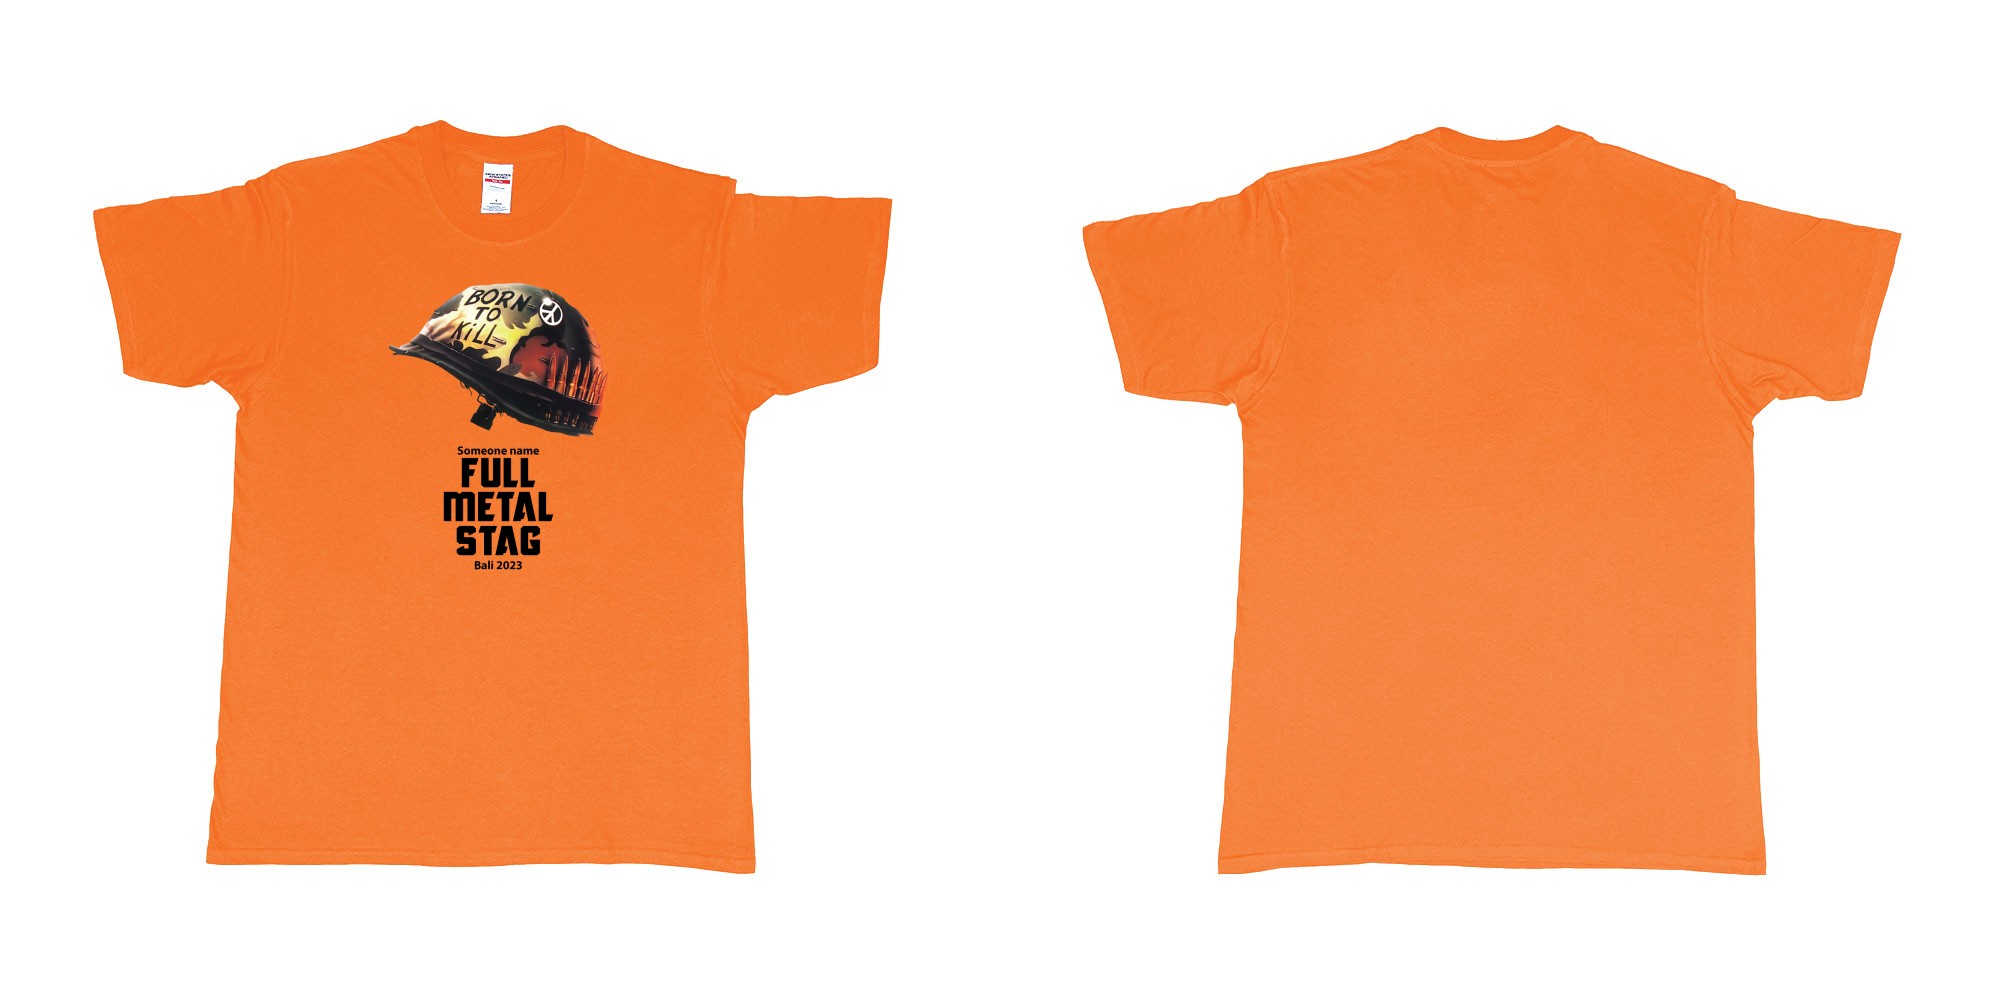 Custom tshirt design Full Metal Jacket Stag in fabric color orange choice your own text made in Bali by The Pirate Way